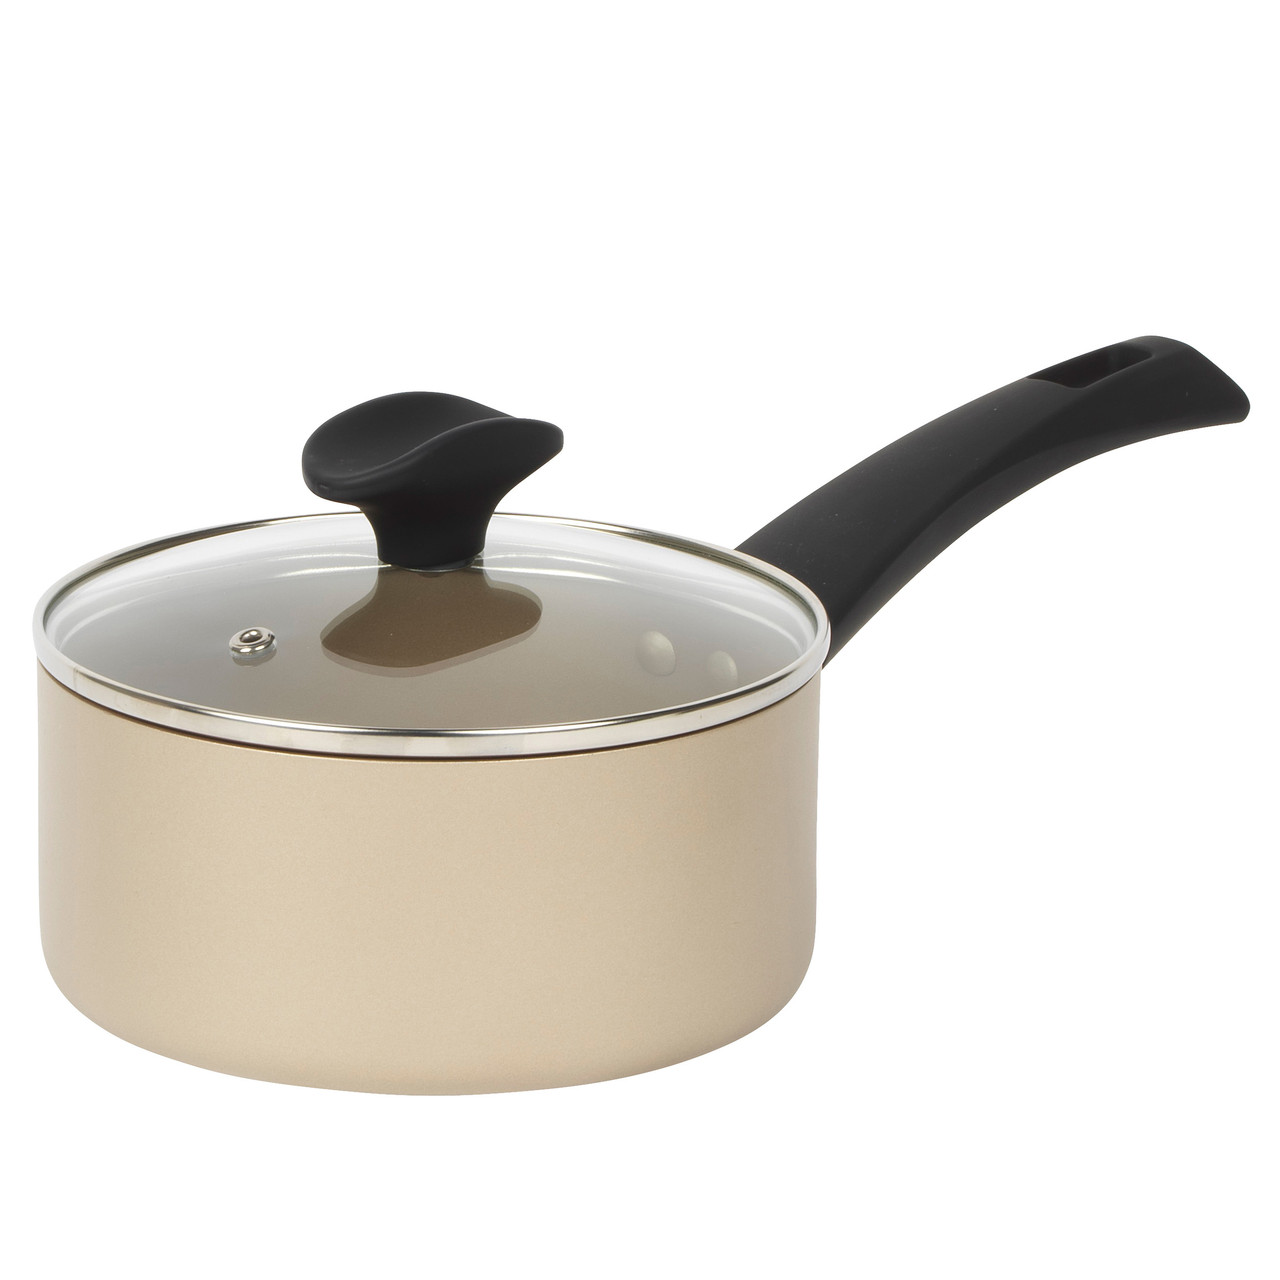 Olympus 16 cm Saucepan with Tempered Glass Lid, Non-Stick,